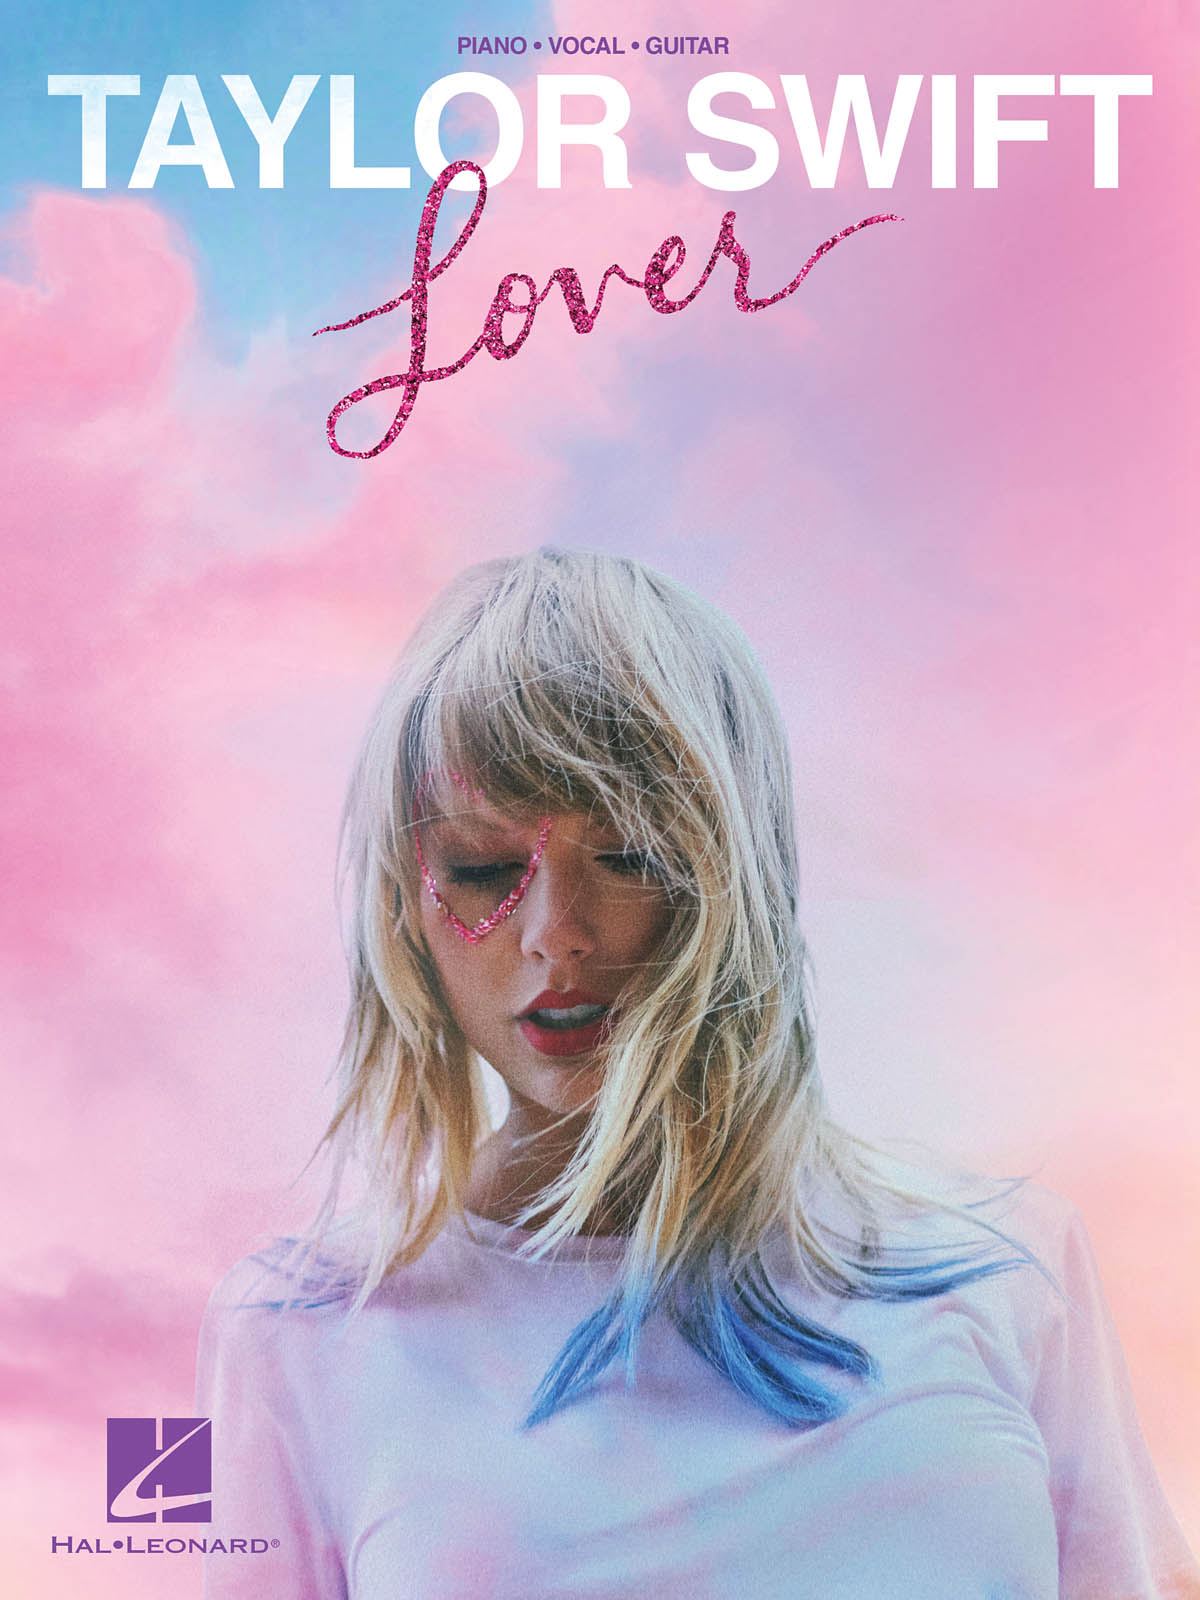 Taylor Swift: Taylor Swift - Lover: Piano  Vocal and Guitar: Album Songbook